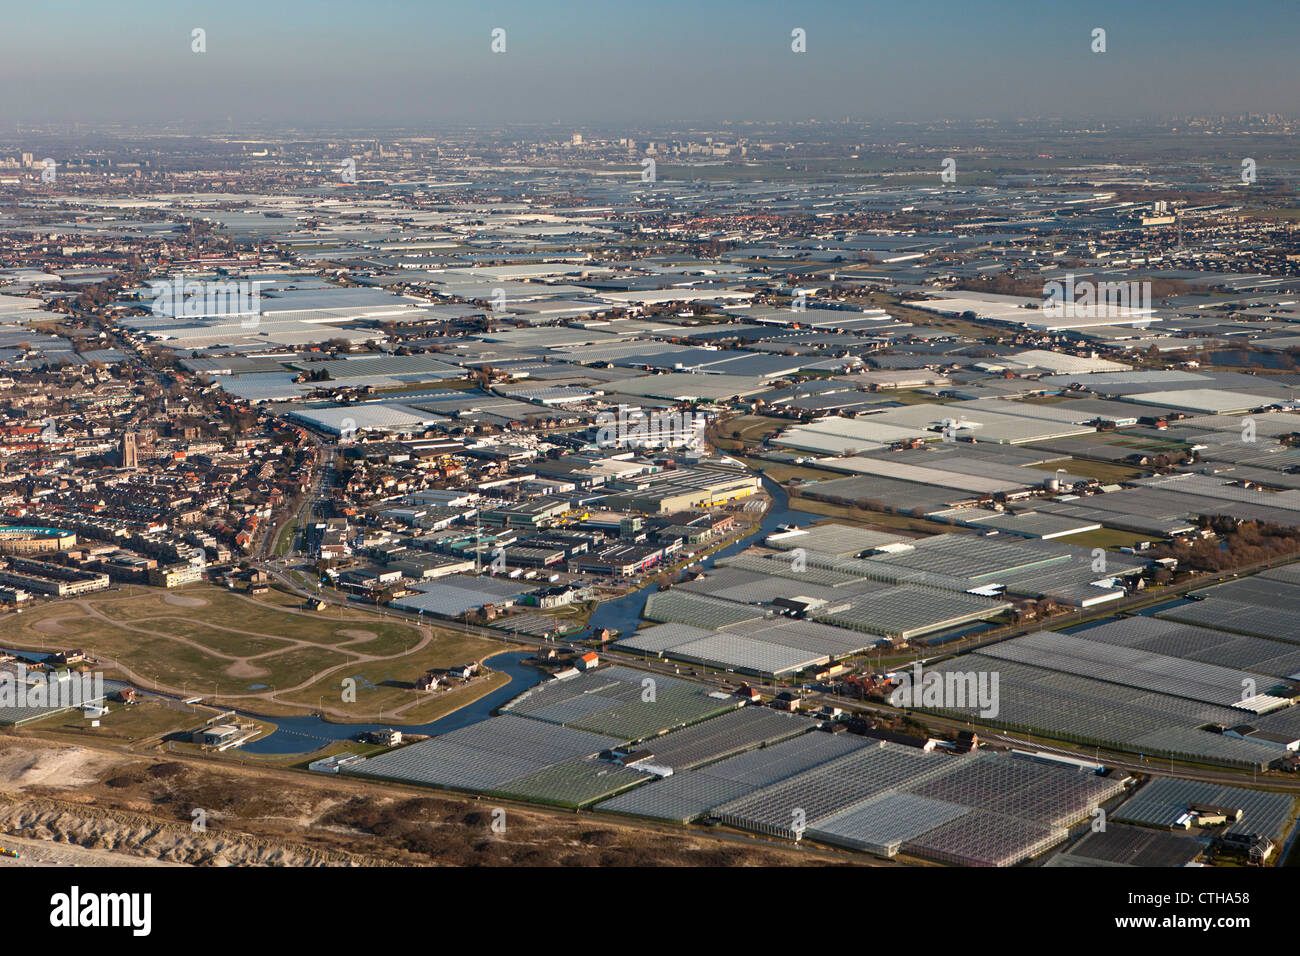 The Netherlands, Monster, Westland region. Horticulture in greenhouses. Aerial. Stock Photo